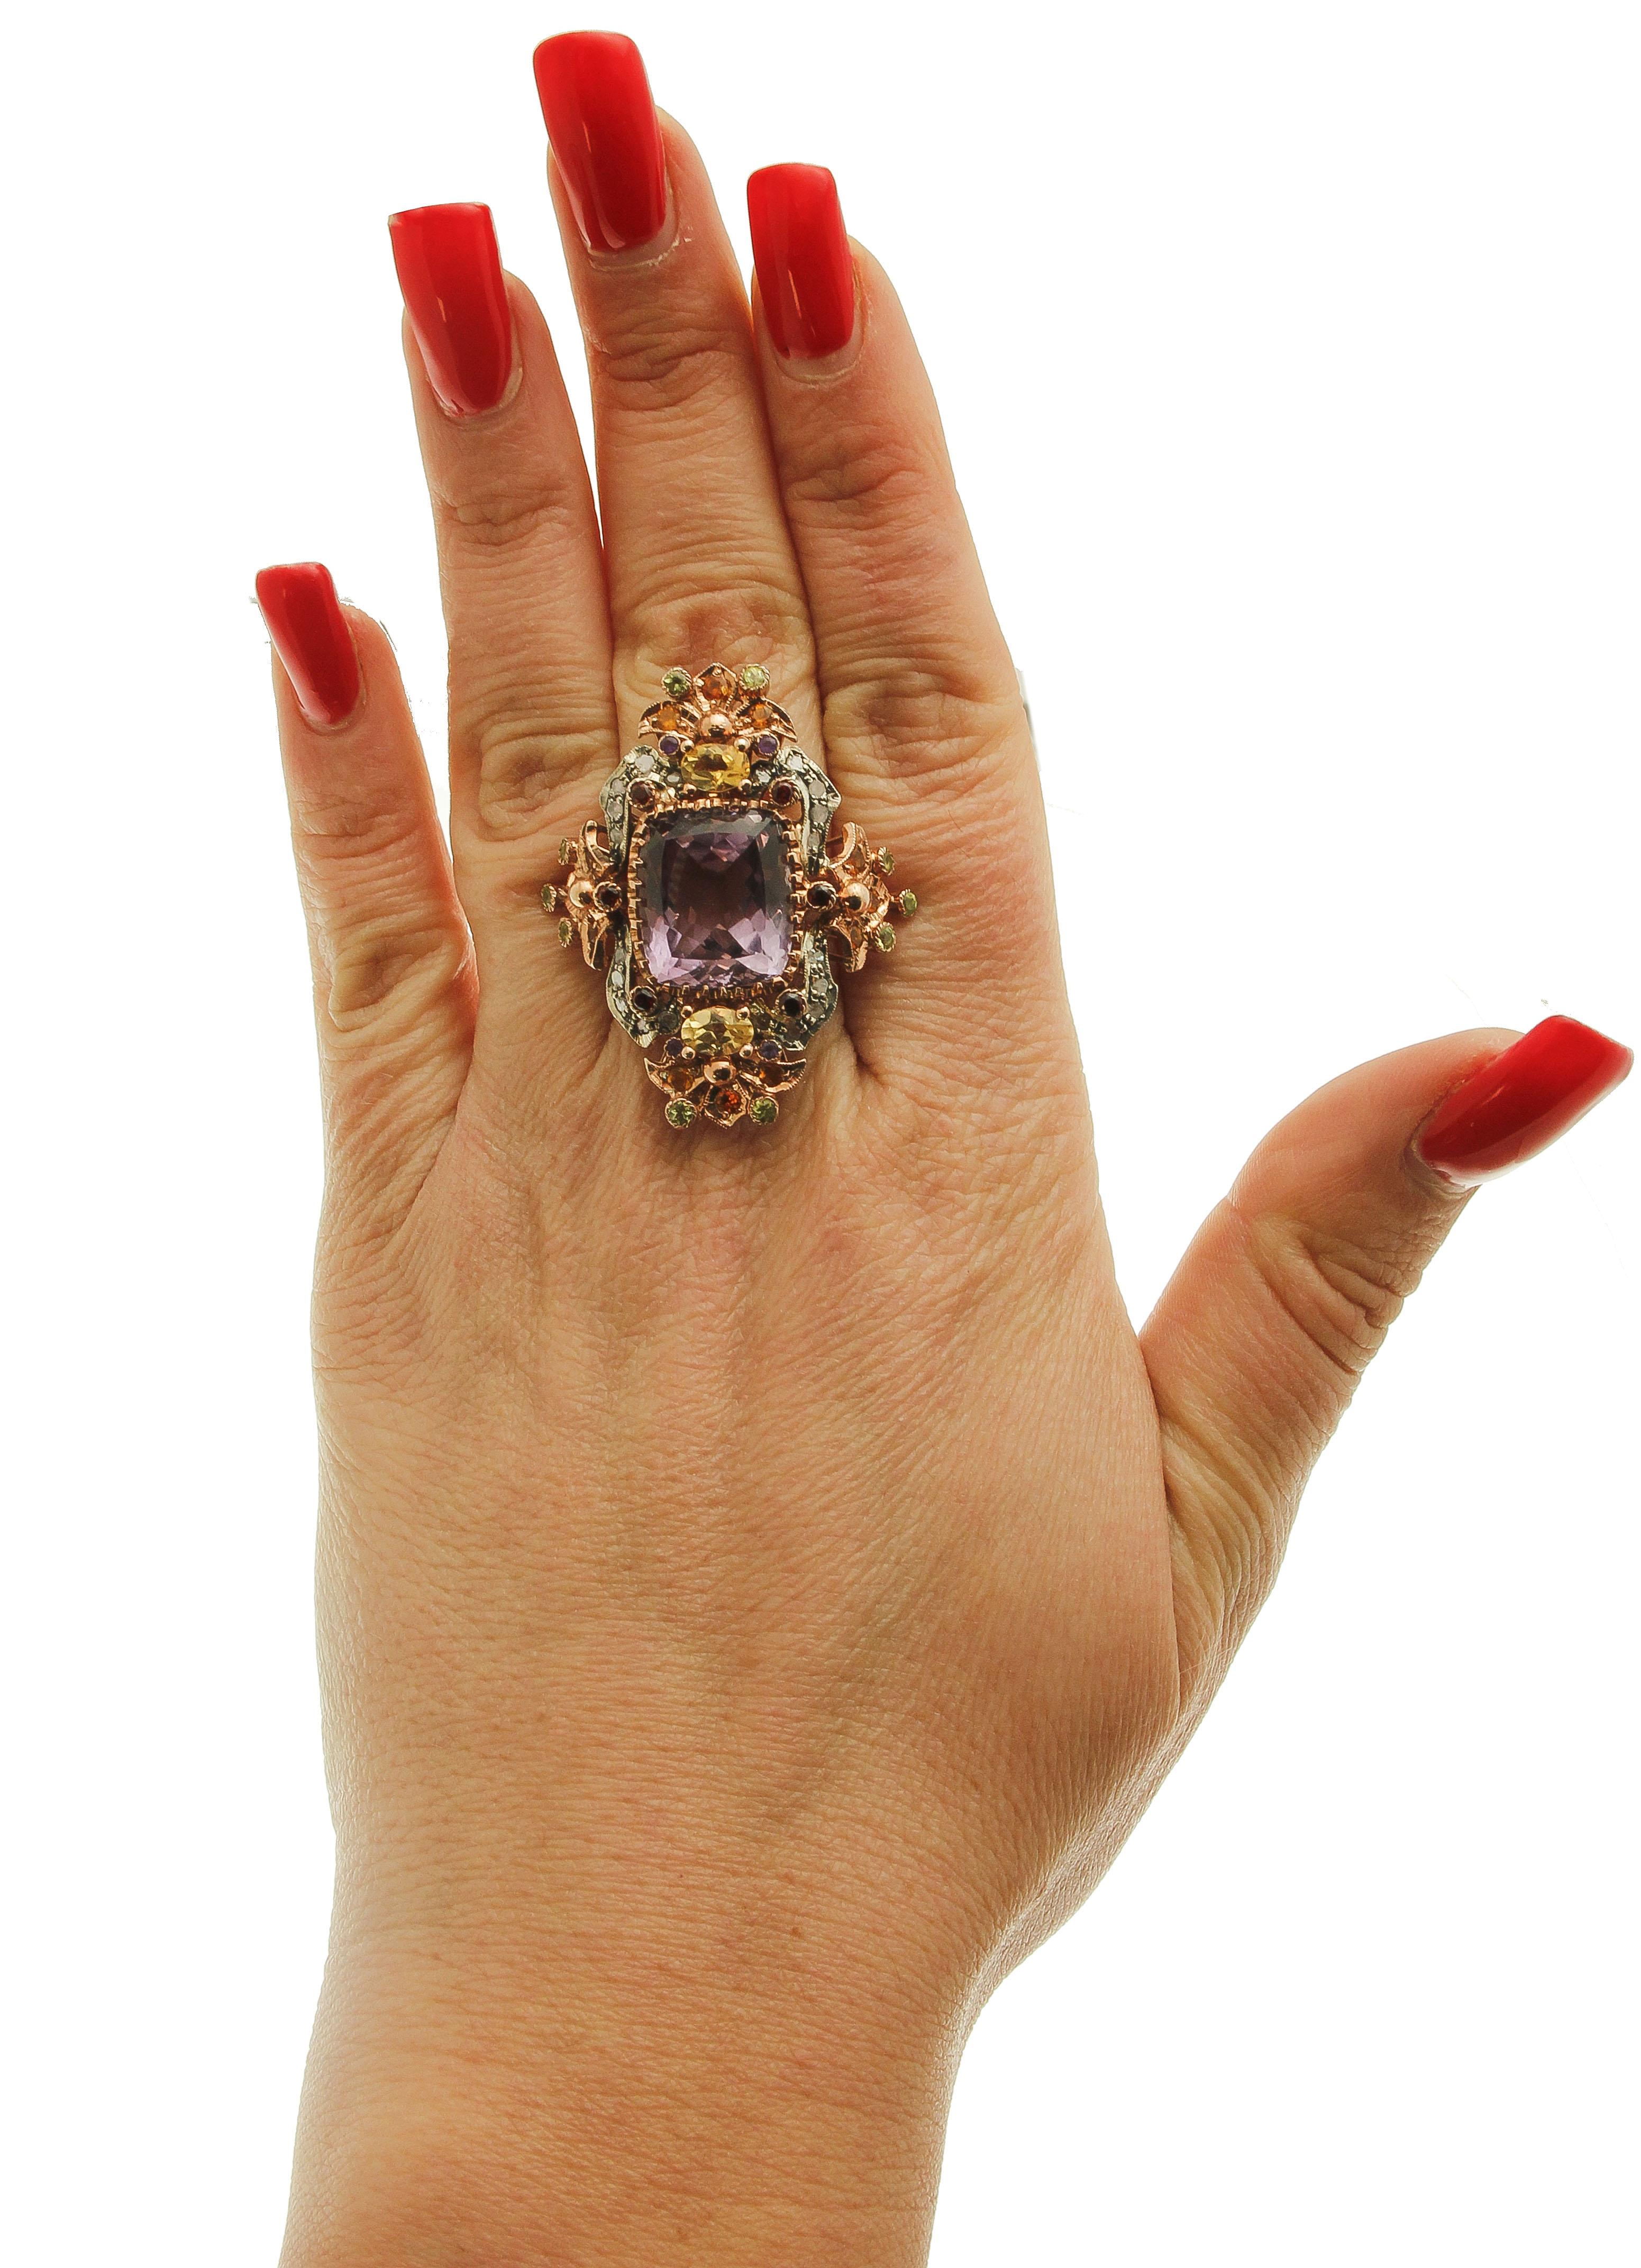 Mixed Cut Amethysts, Topazes, Garnets, Peridots, Diamonds, 9 Karat Gold and Silver Ring For Sale